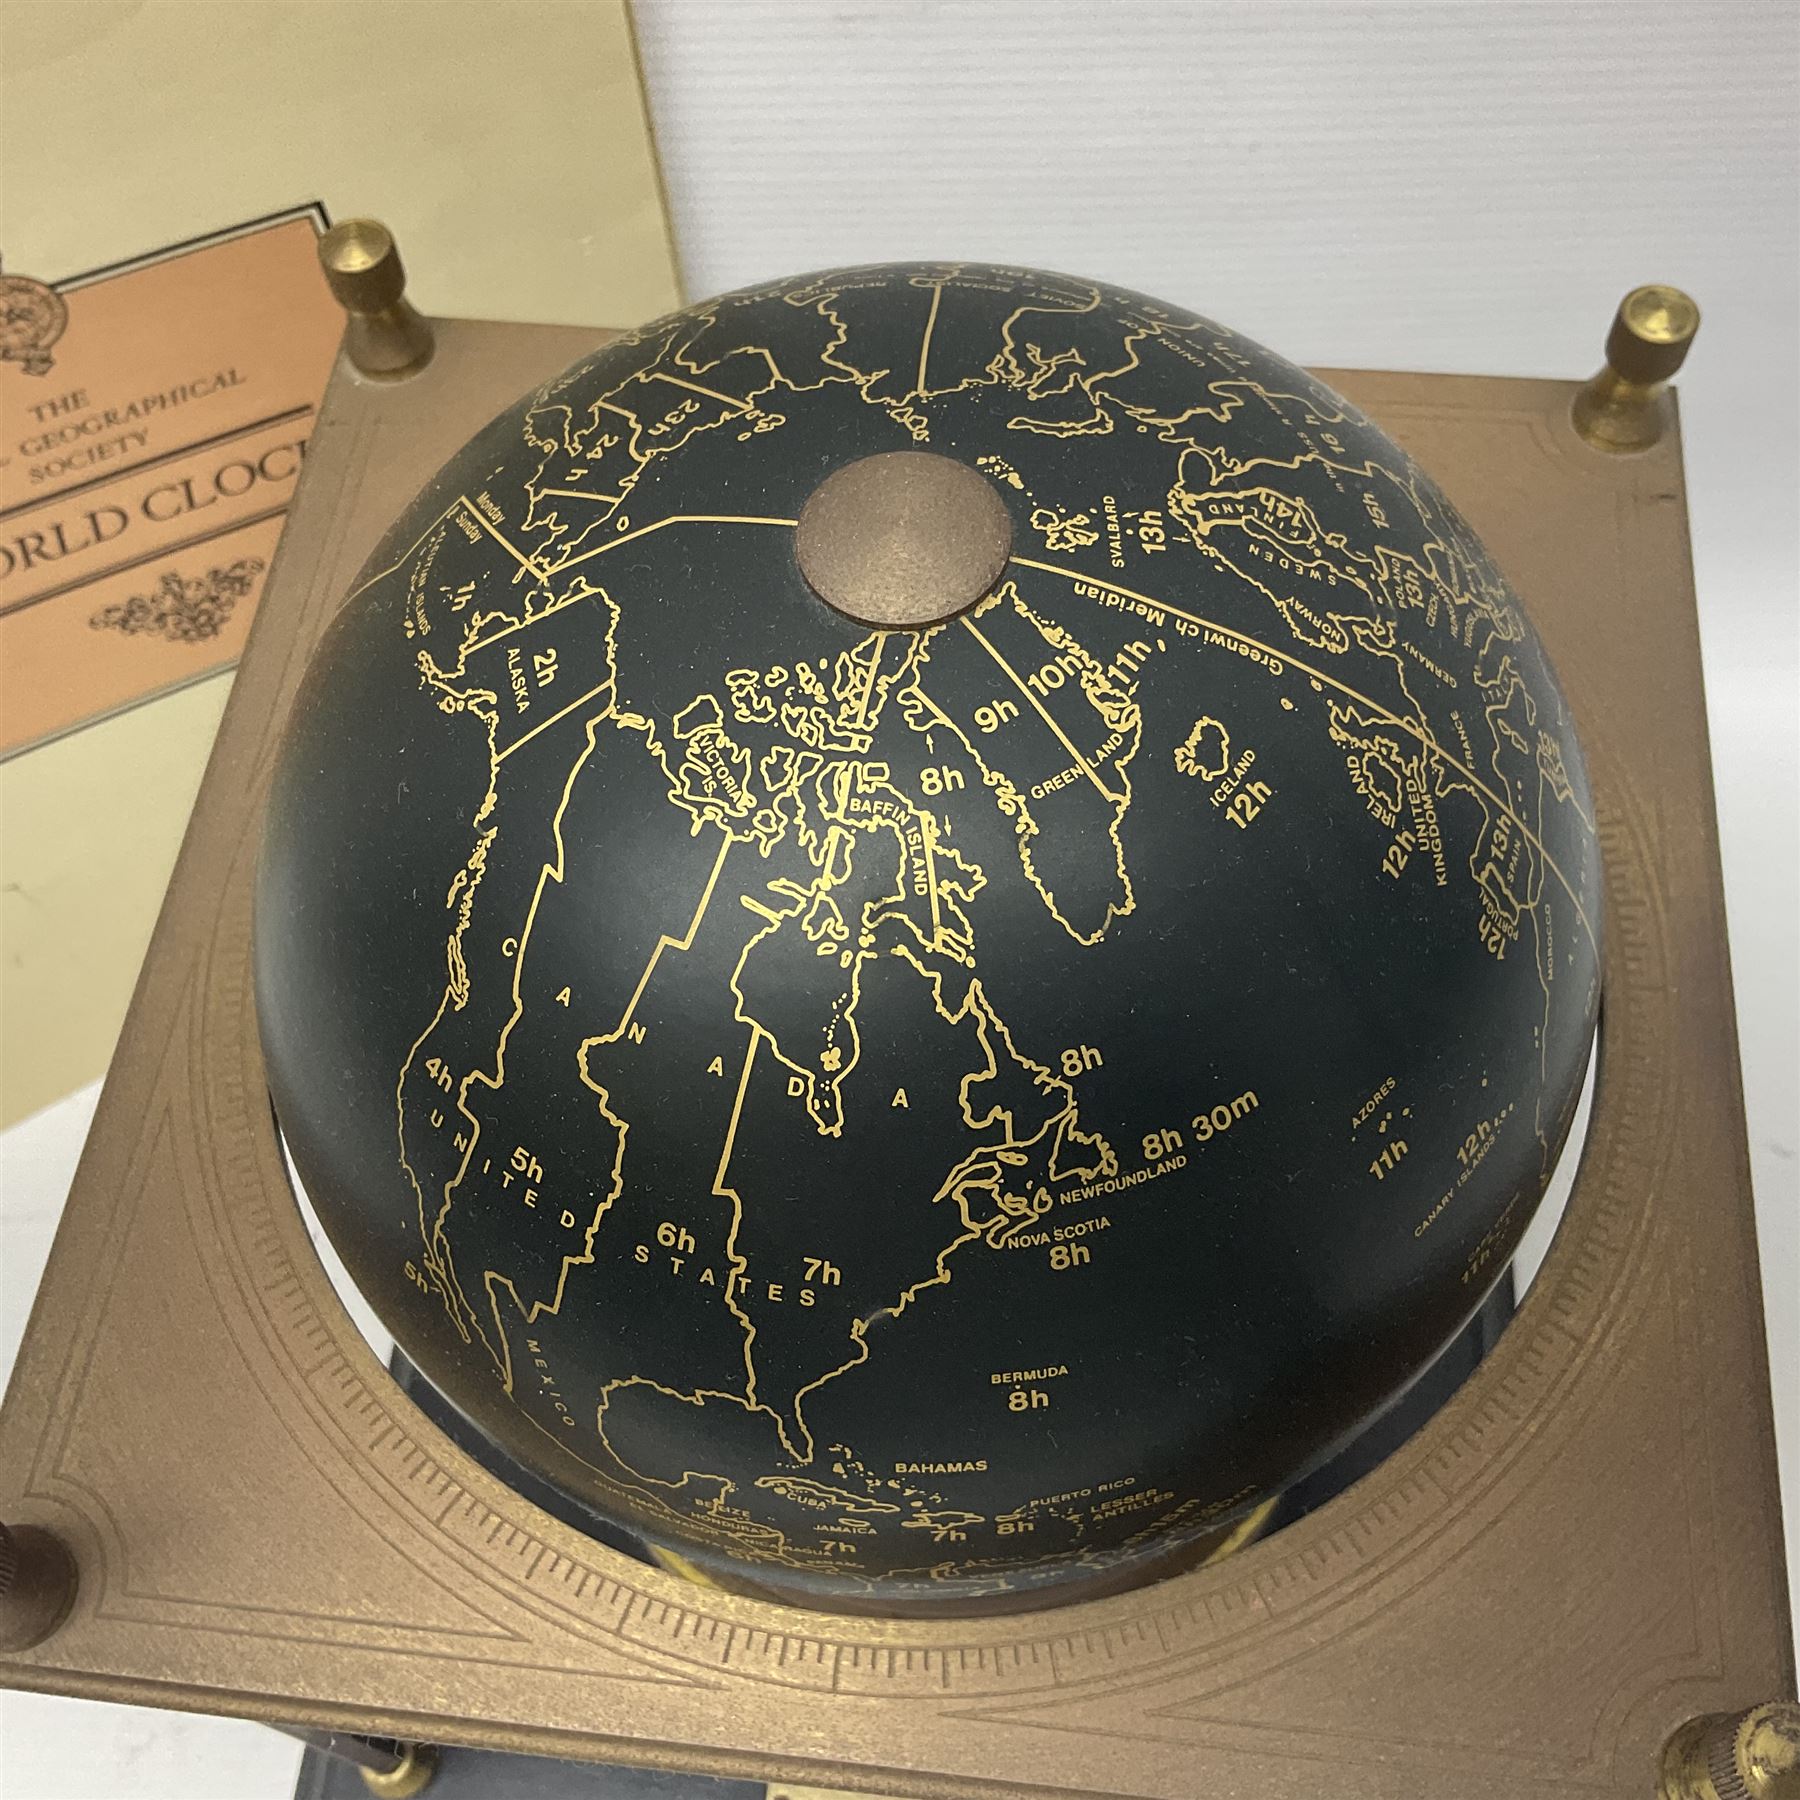 1980 Franklin Mint Royal Geographical Society World Clock with eight day movement indicating current - Image 2 of 11